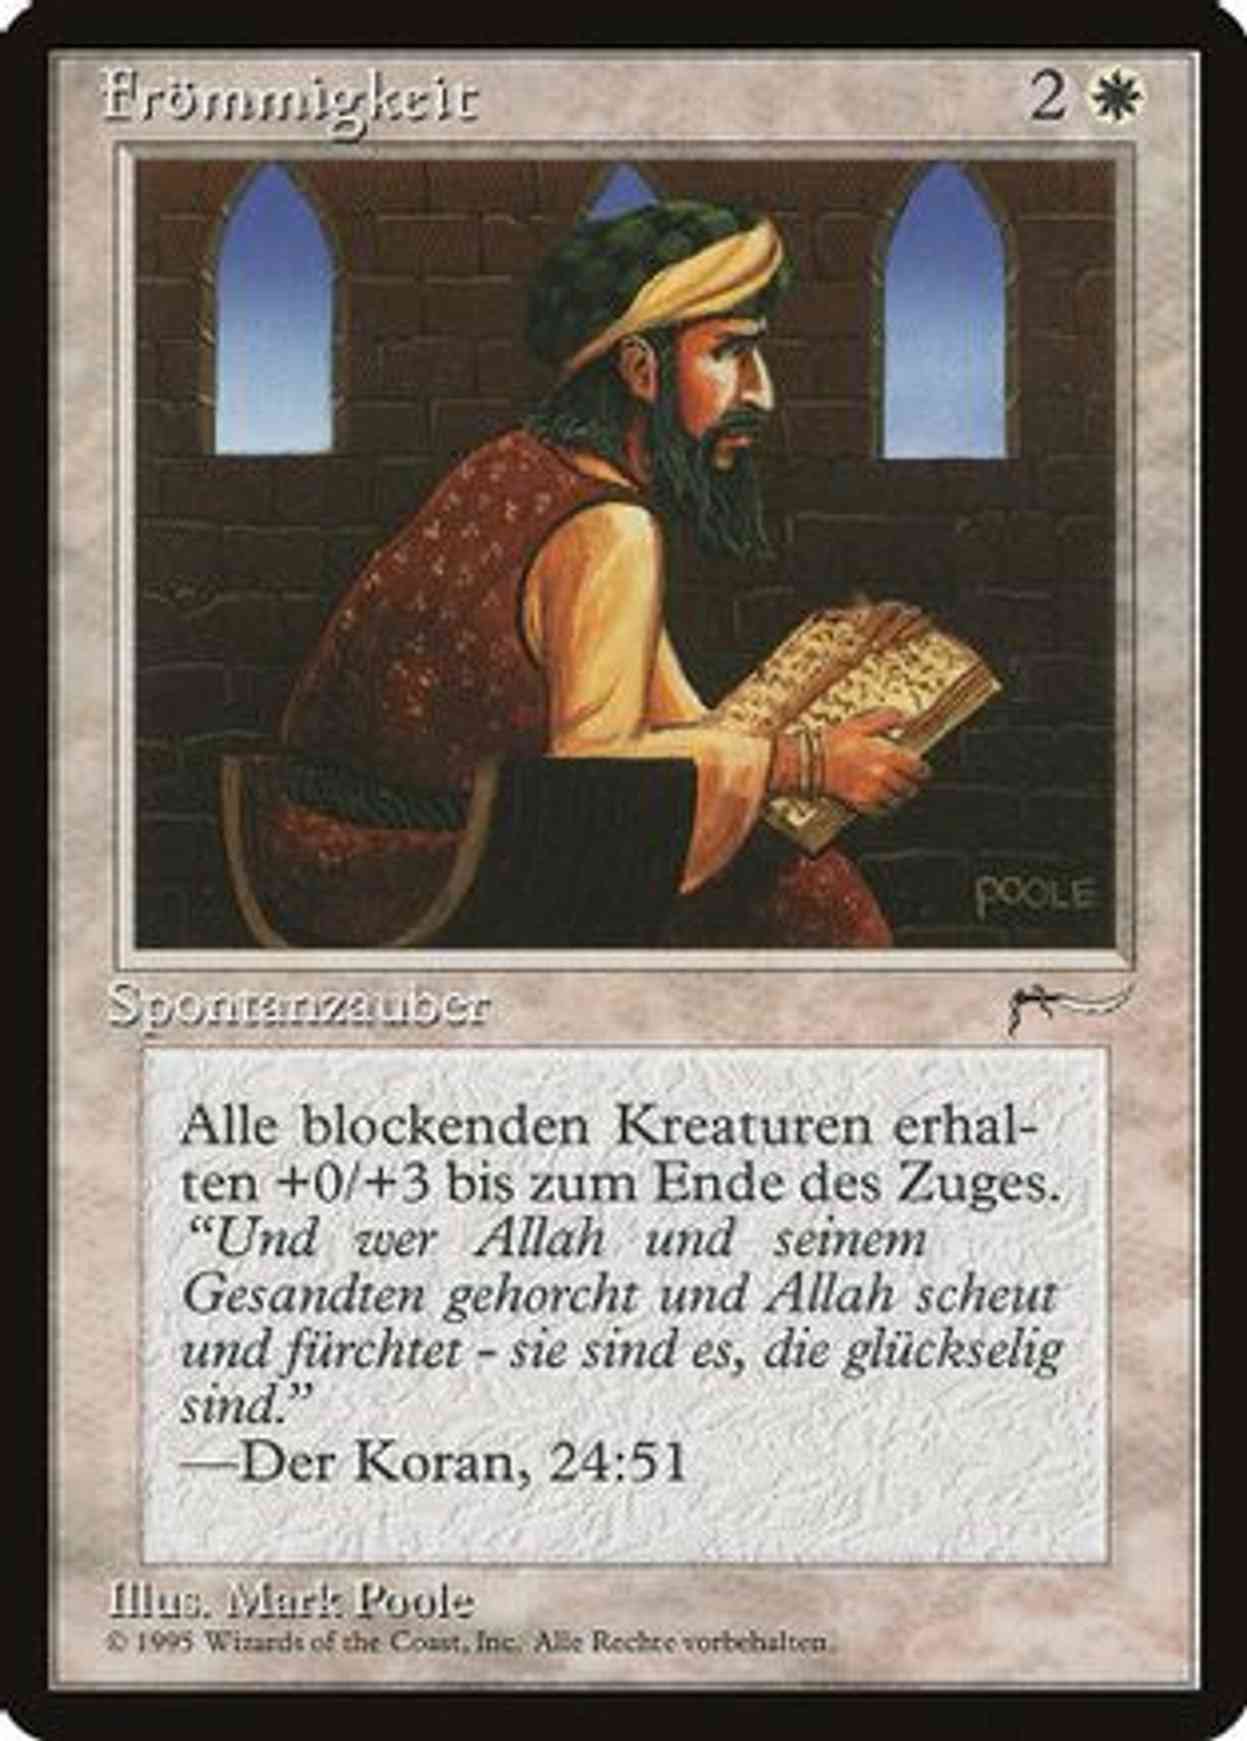 Piety (German) - "Frommigkeit" magic card front